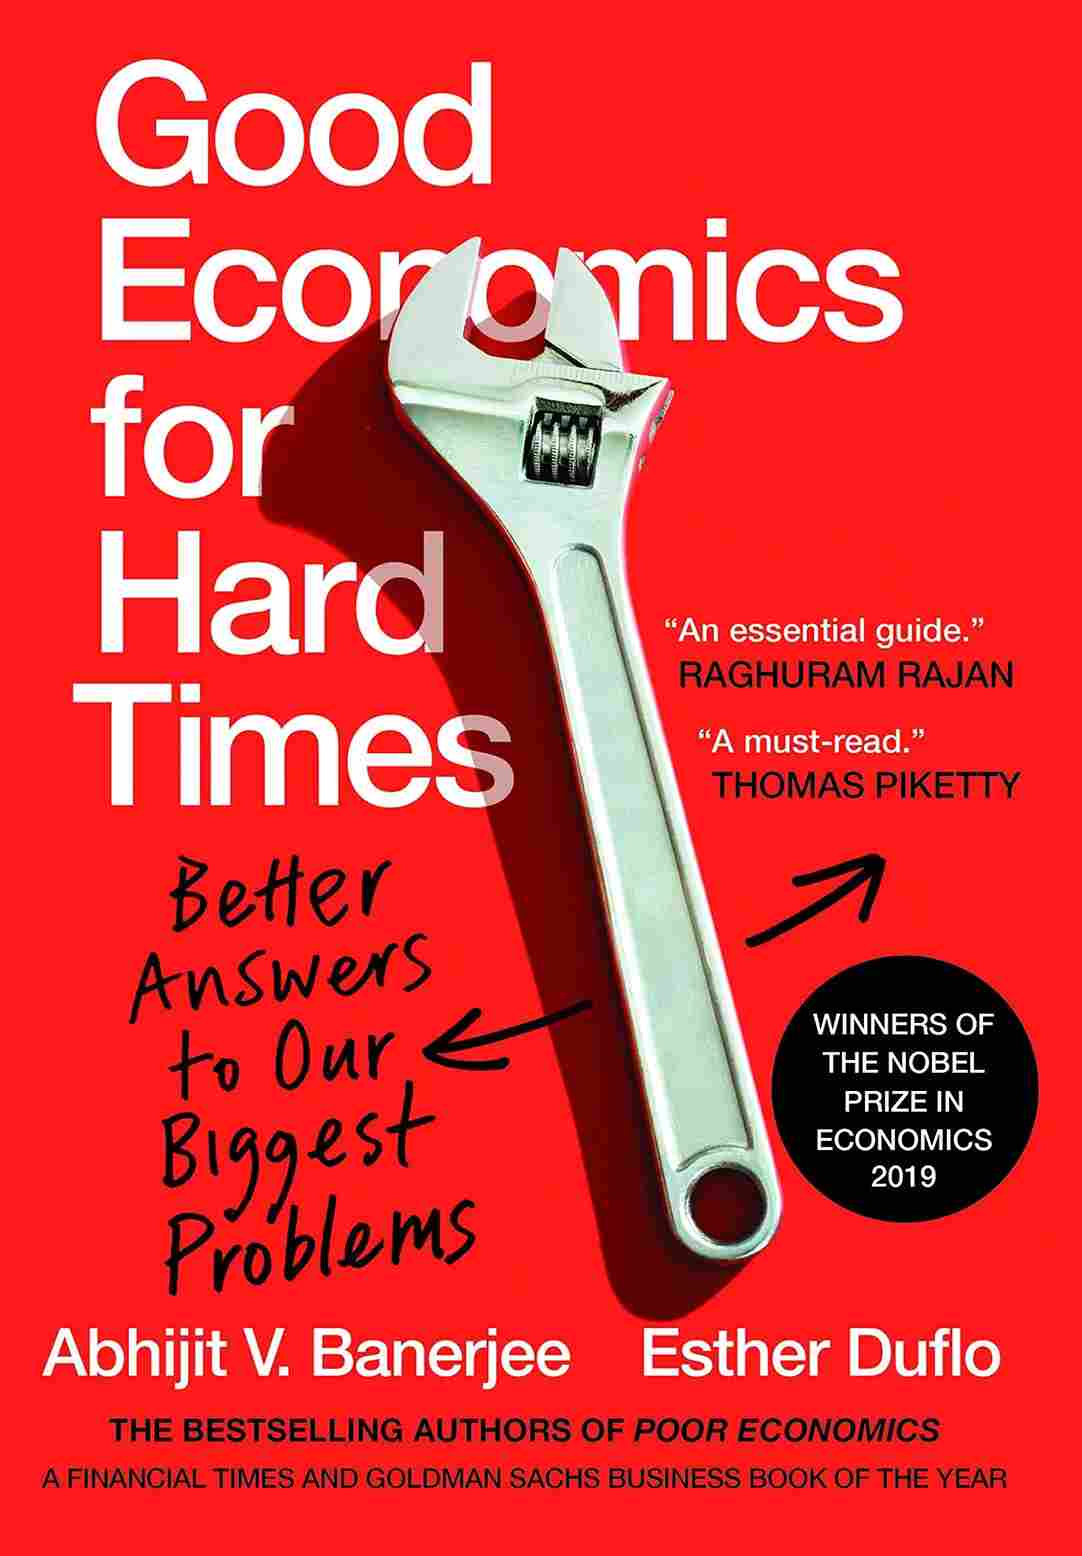 Good Economics for Hard Times by Abhijit Banerjee (Paperback) - 99BooksStore